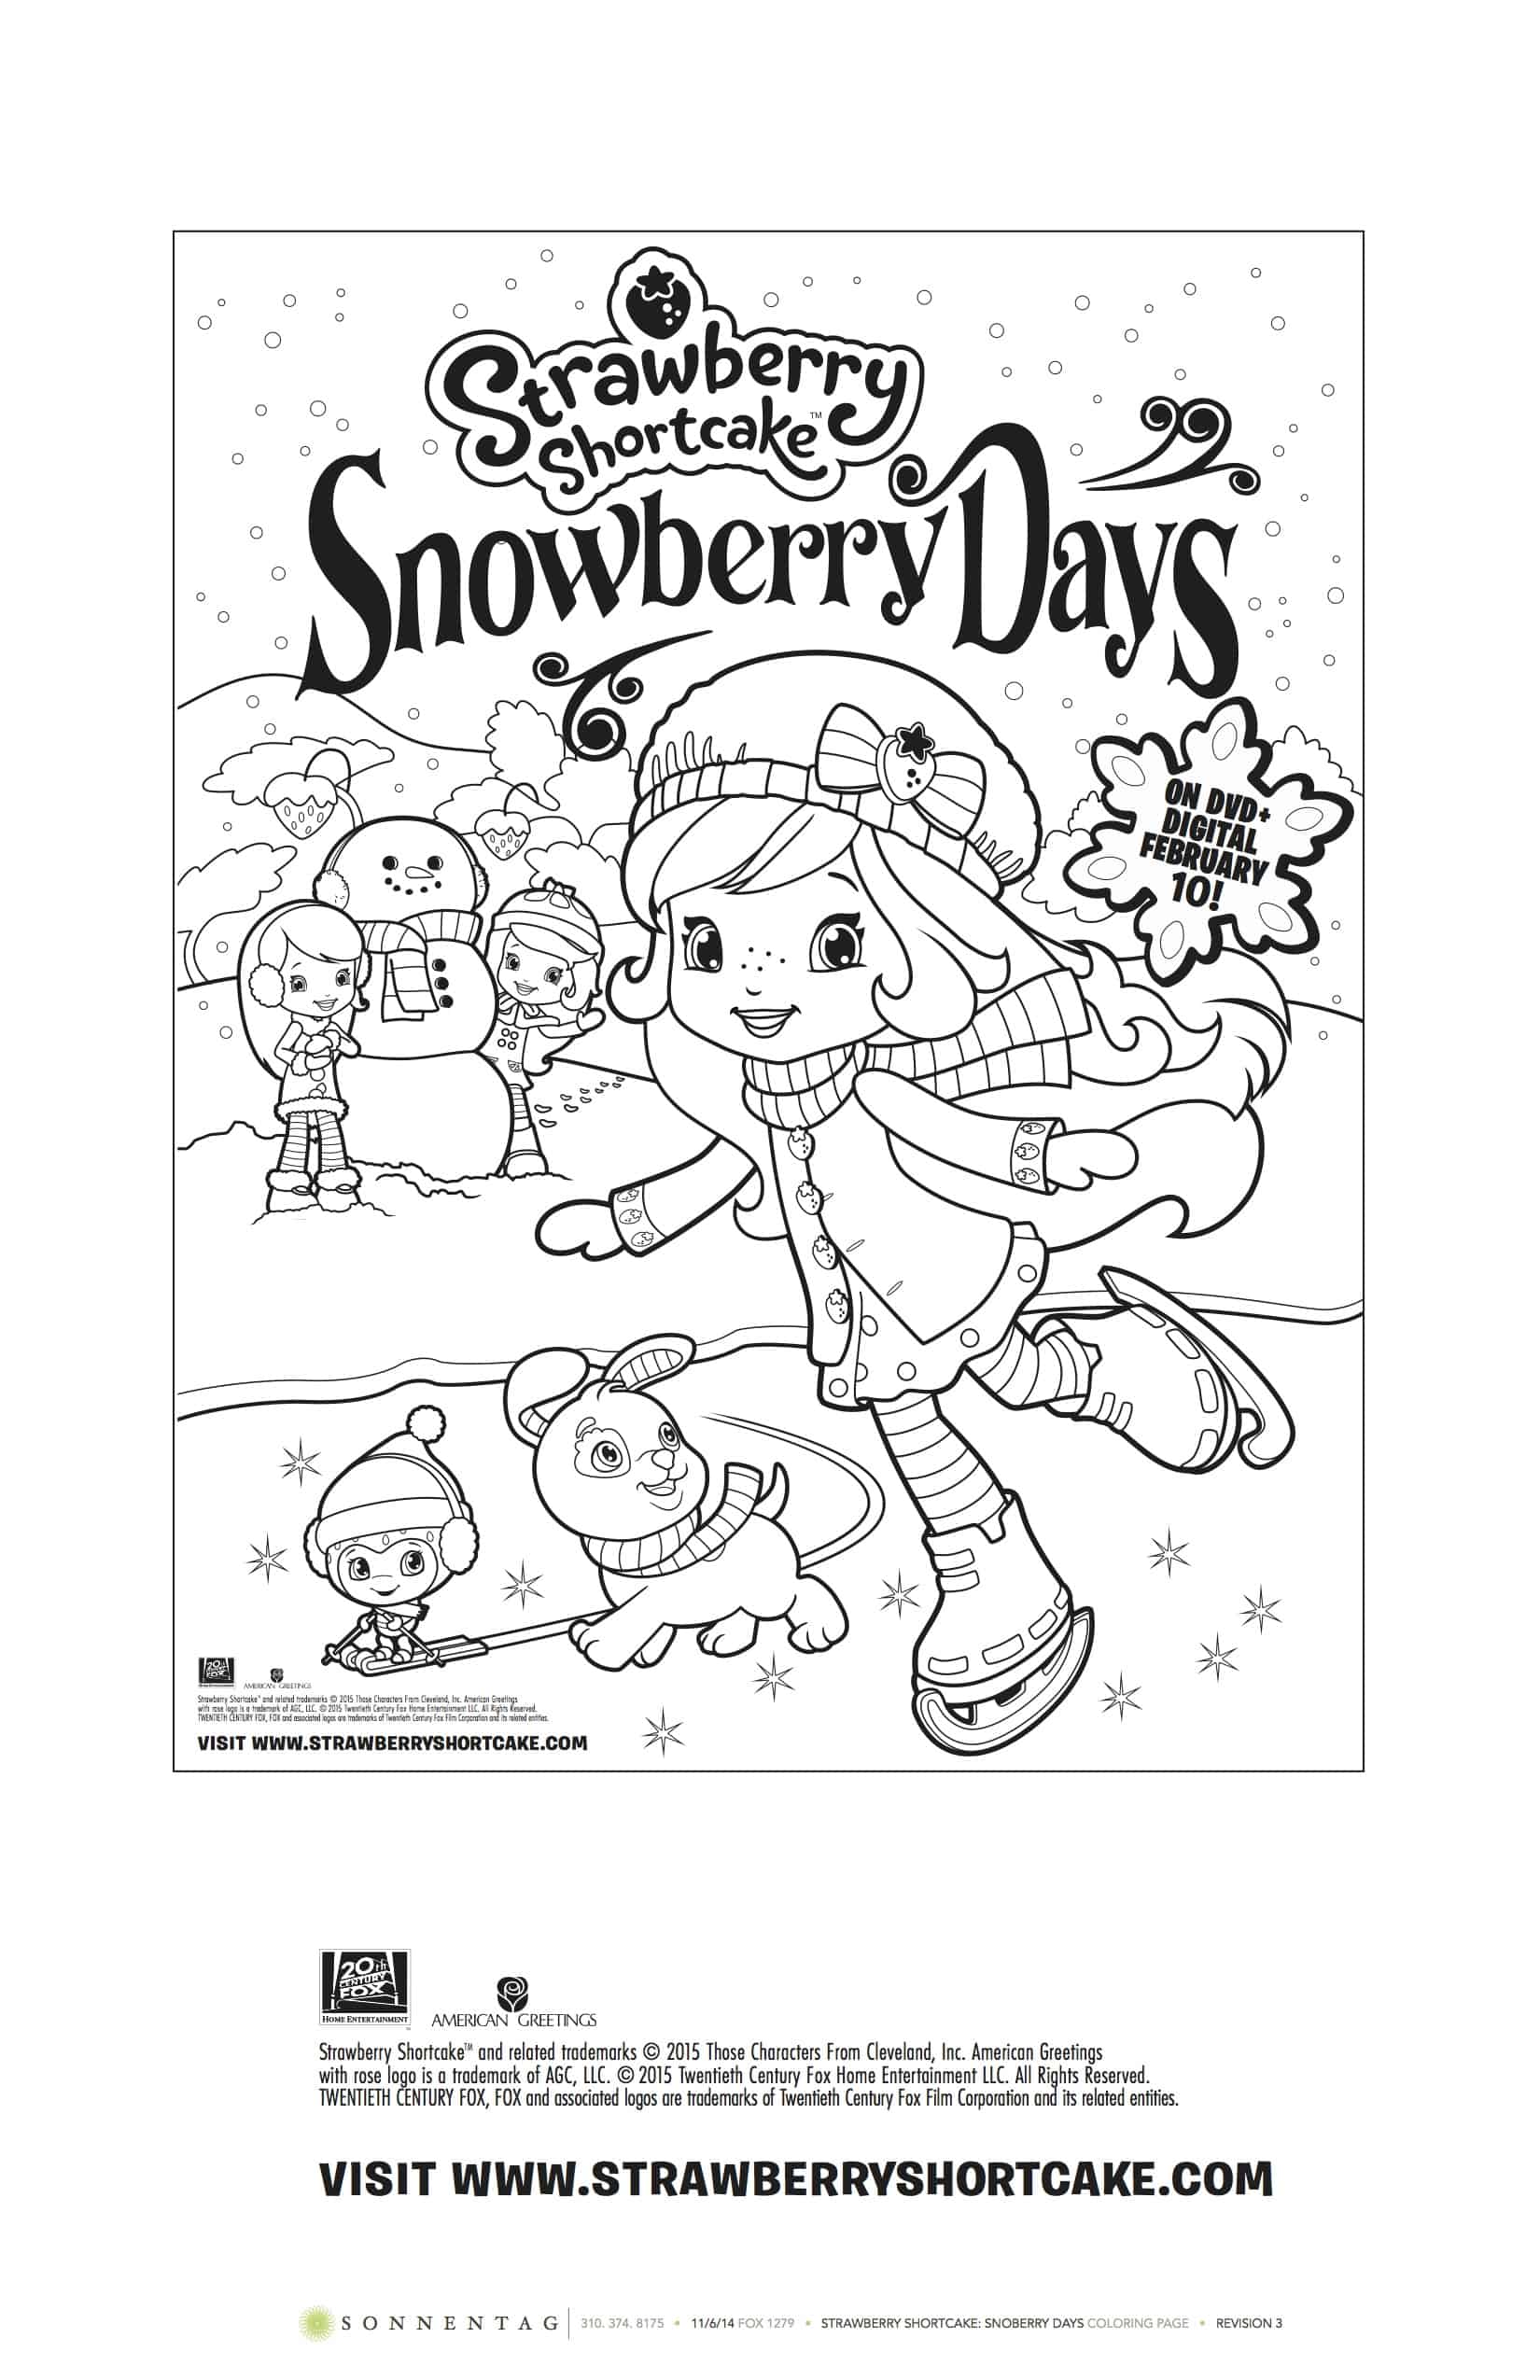 Free strawberry shortcake snowberry days coloring page